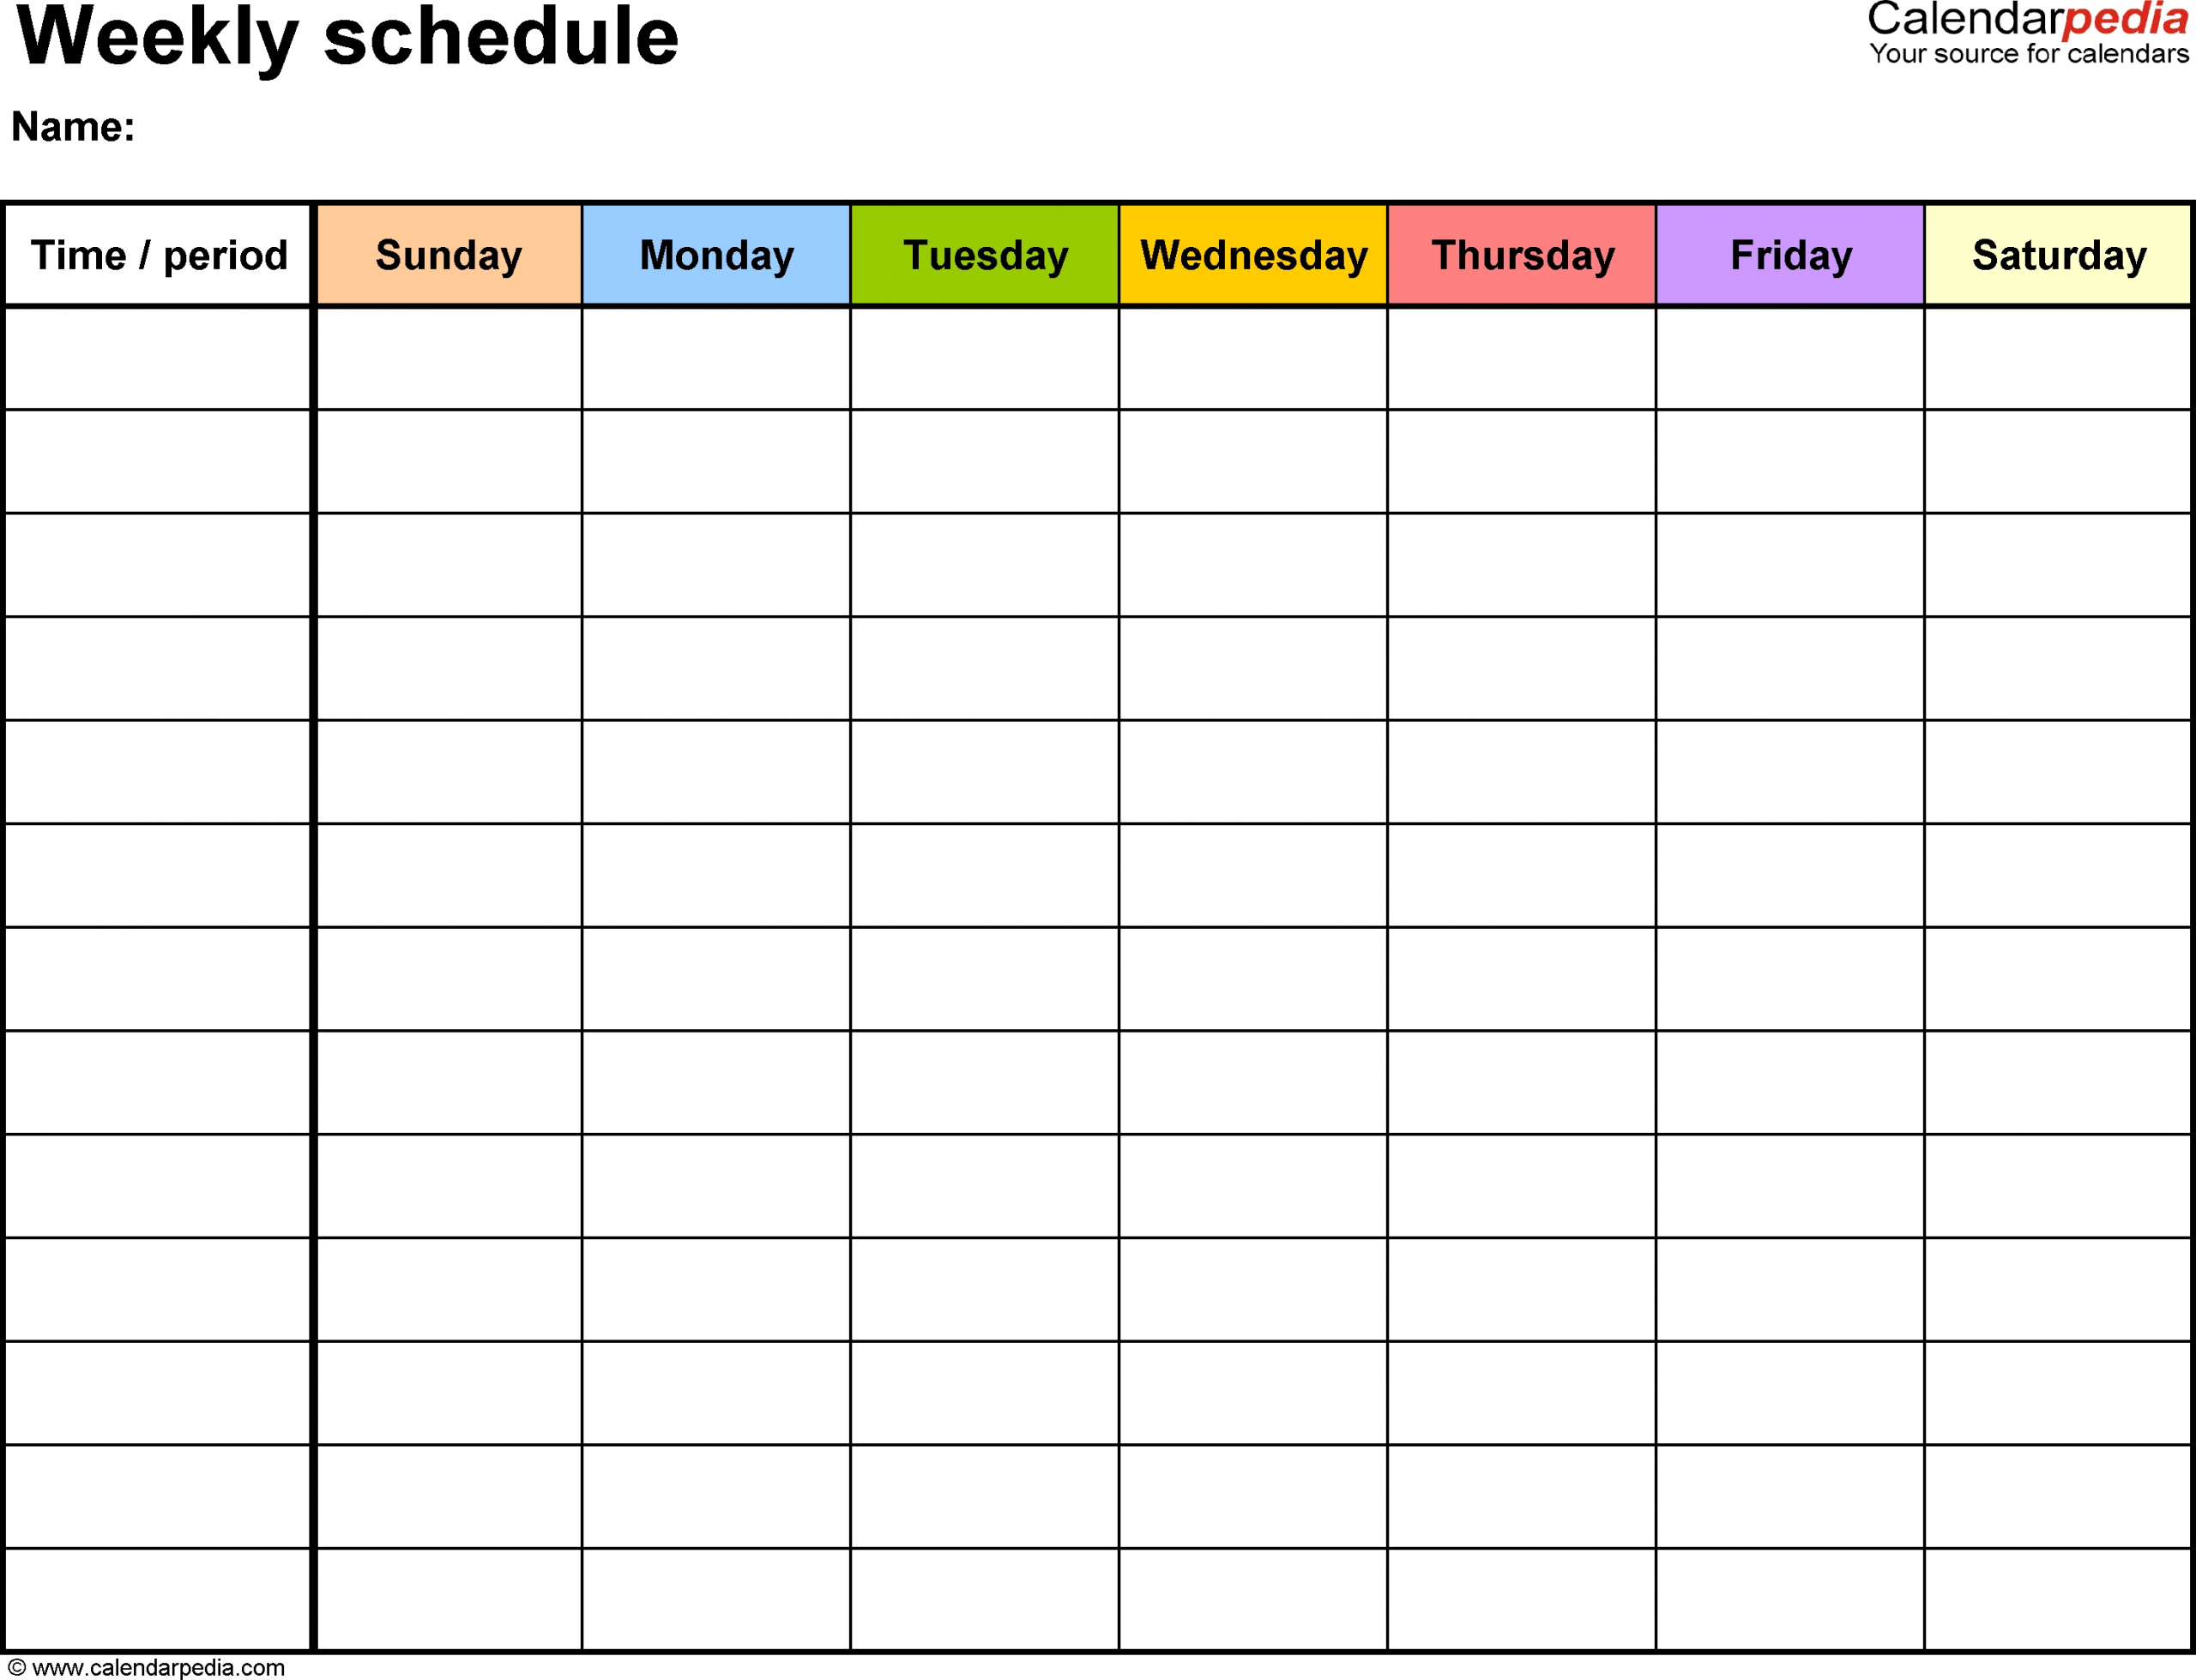 Weekly Schedule Template For Word Version 13: Landscape, 1 Page throughout Printable Sunday Thru Saturday To Do List Calendar